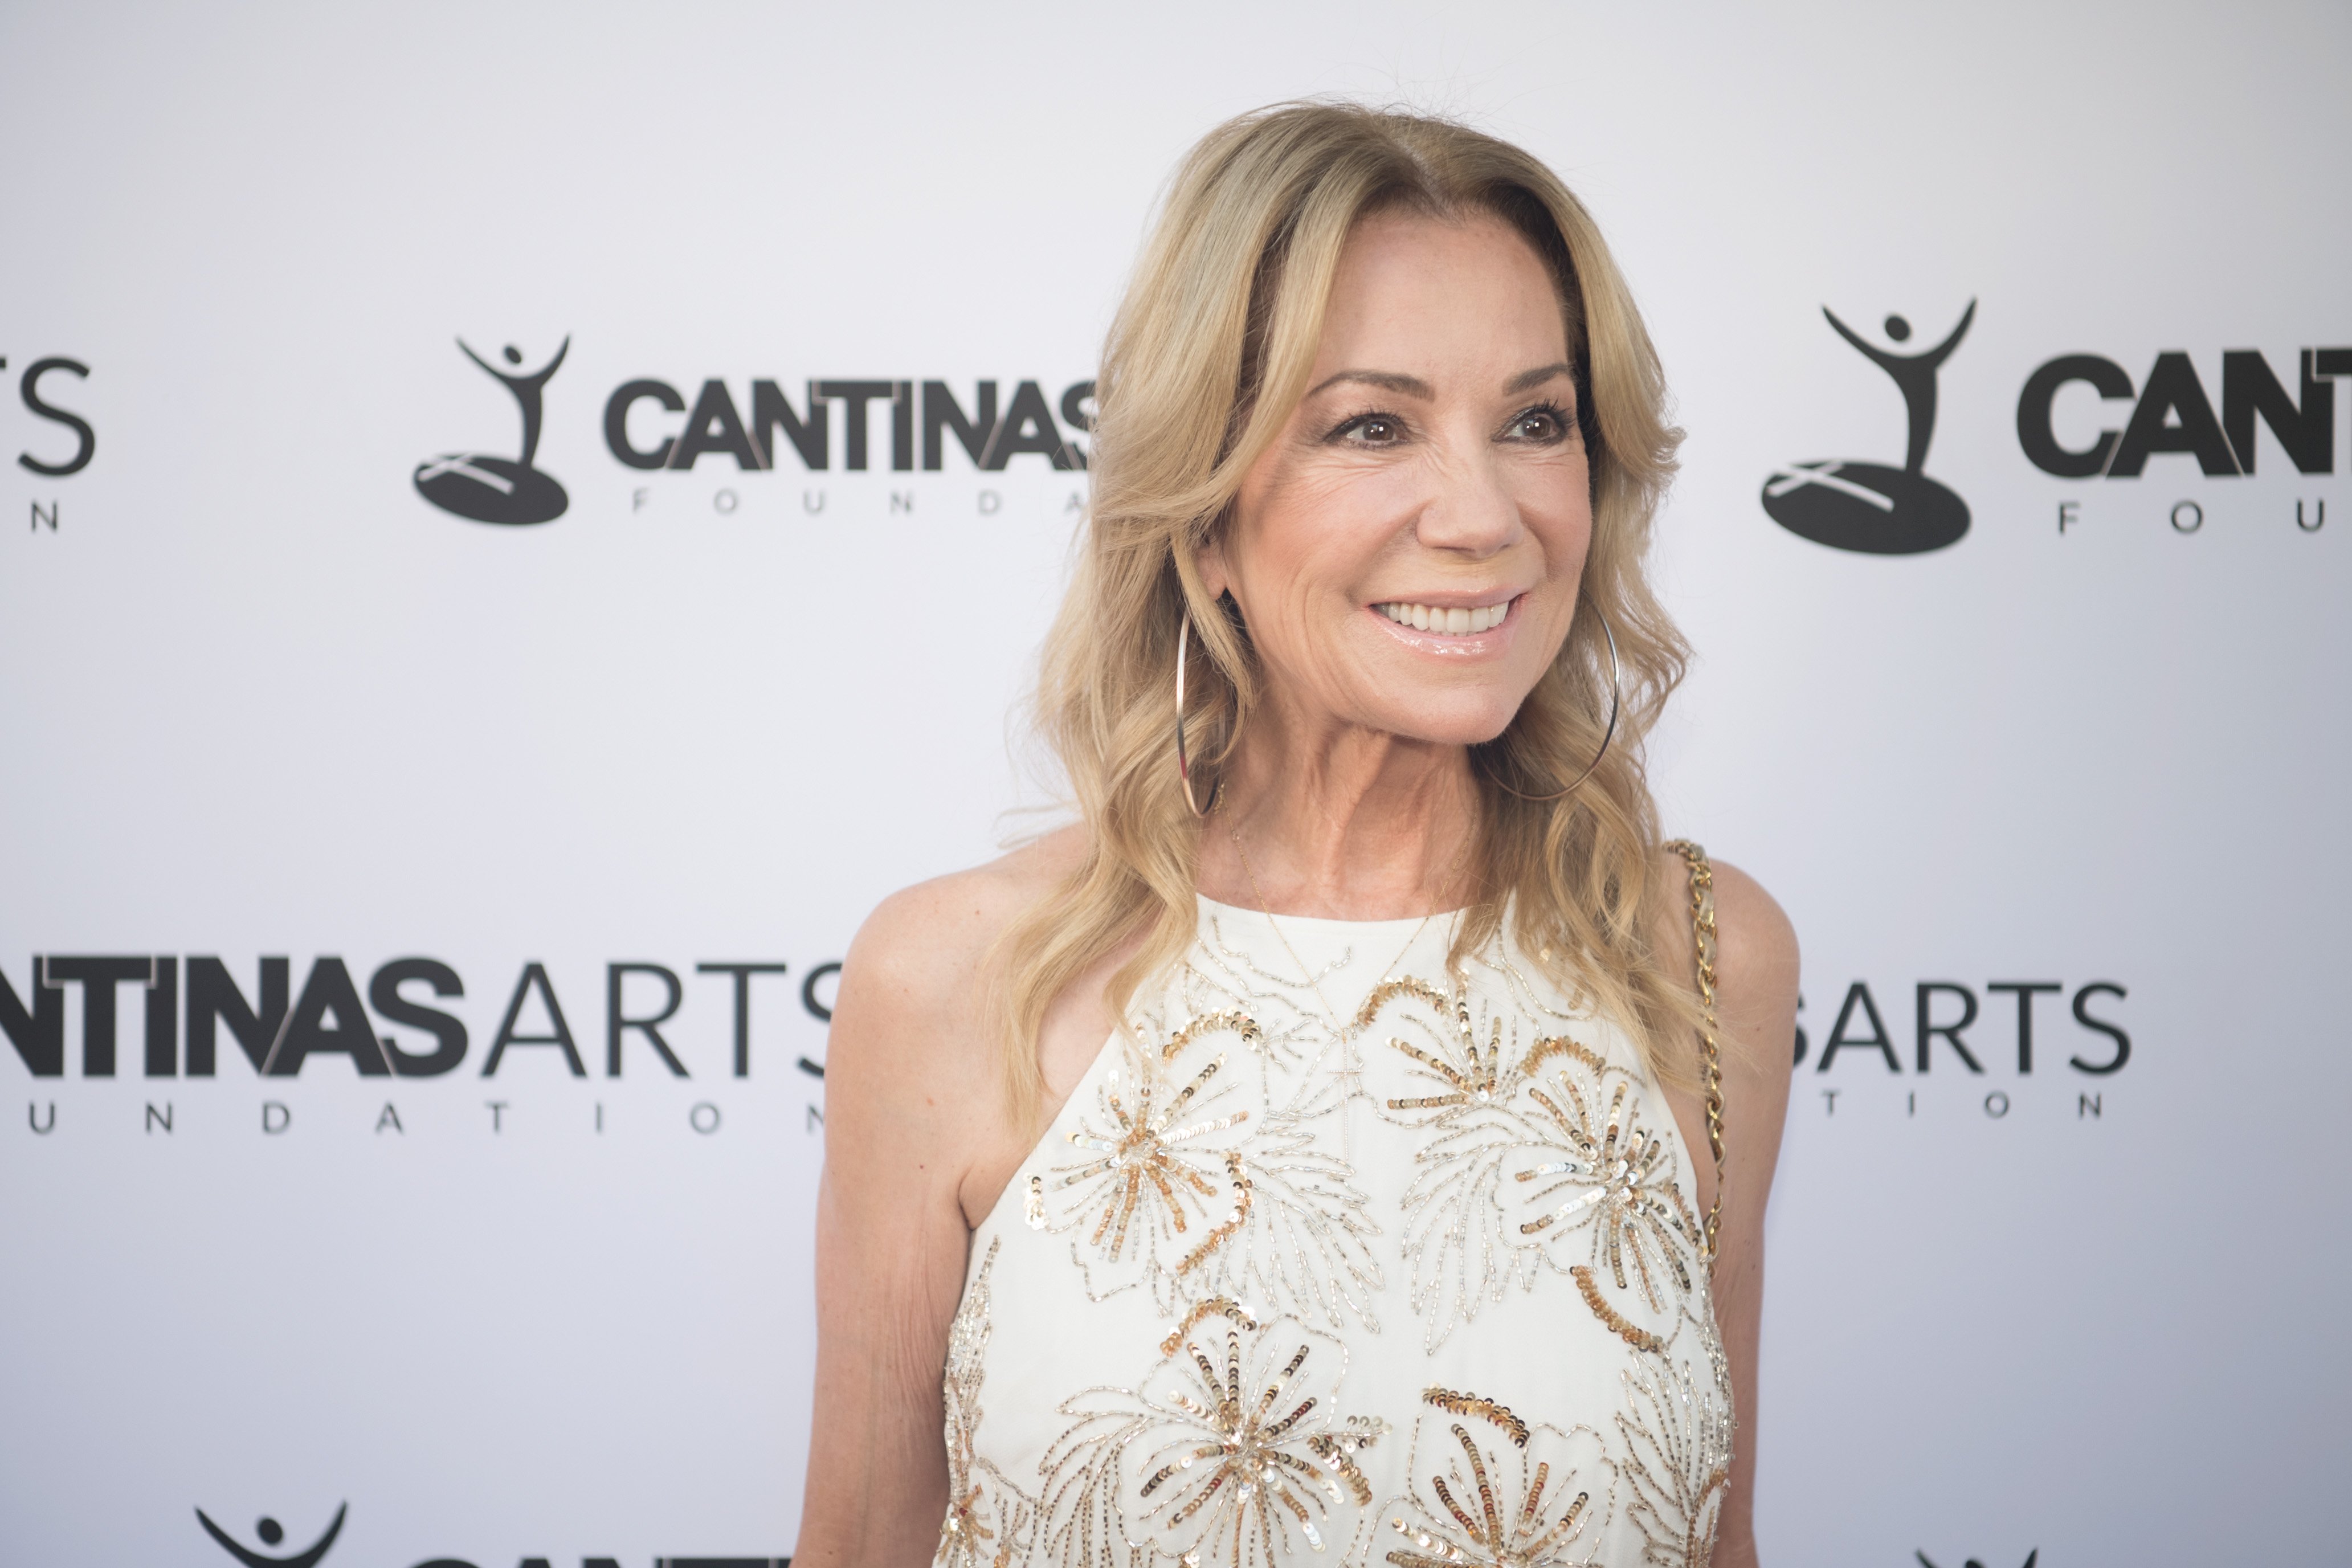 Kathie Lee Gifford arrives at The Cantinas Arts Foundation COTA Celebration of the Arts on September 15, 2018. | Photo: Getty Images